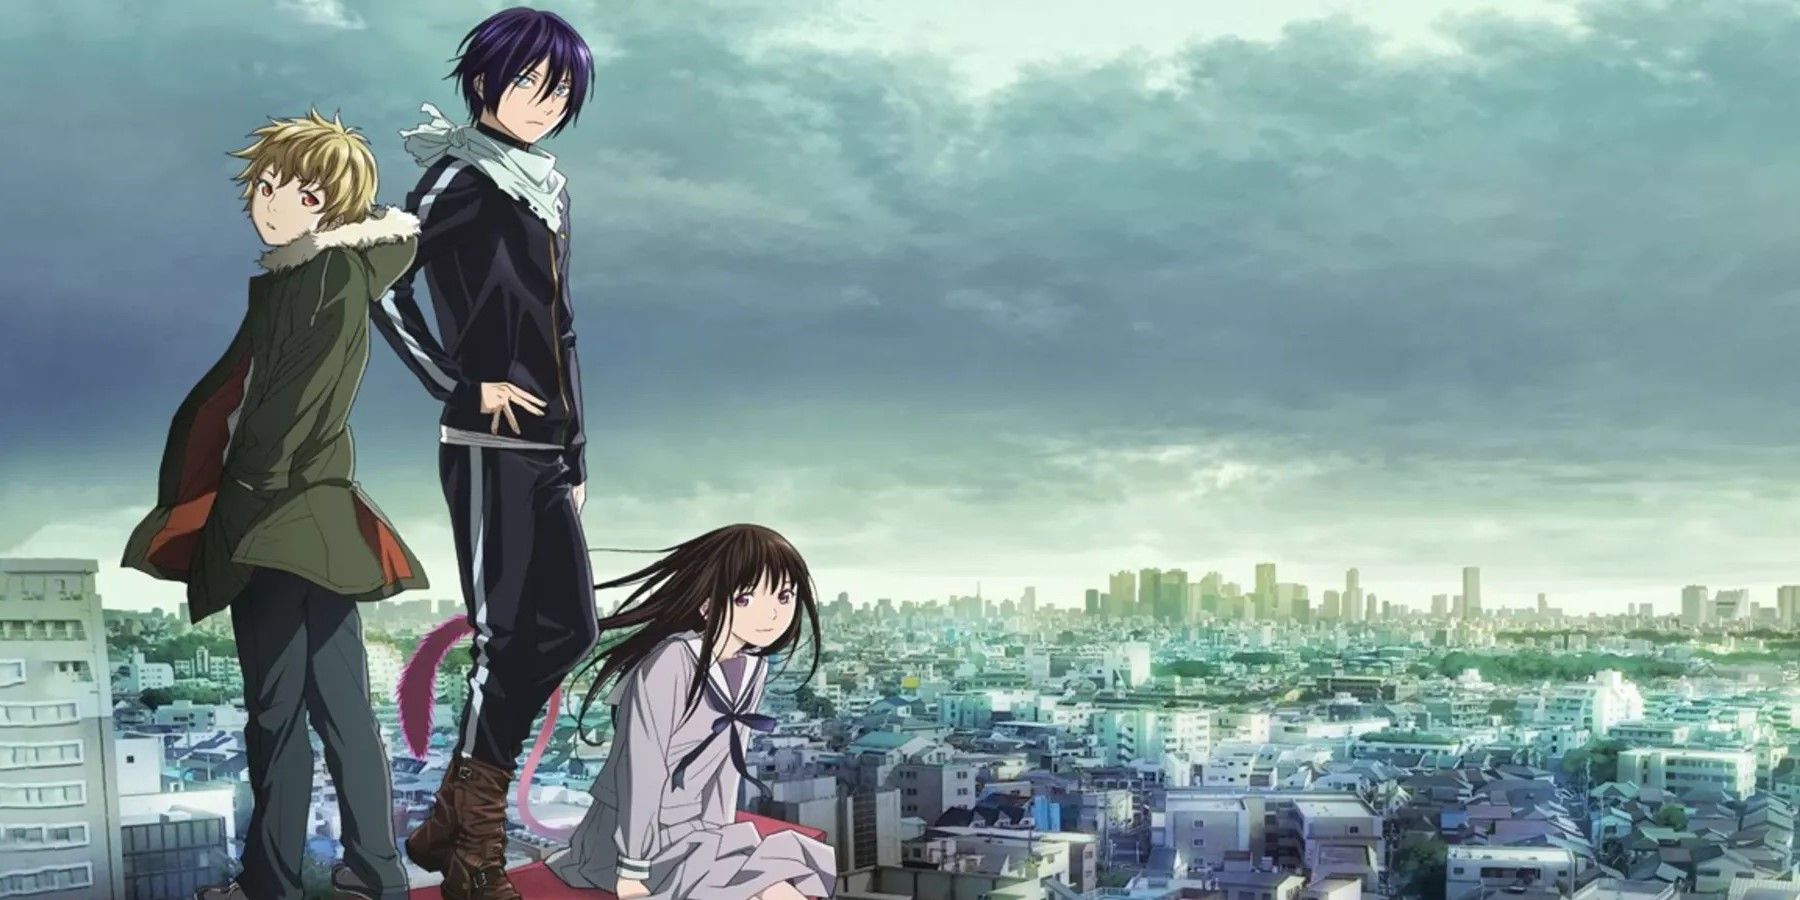 Is Noragami Season 3 Really Coming? Know release date, story and